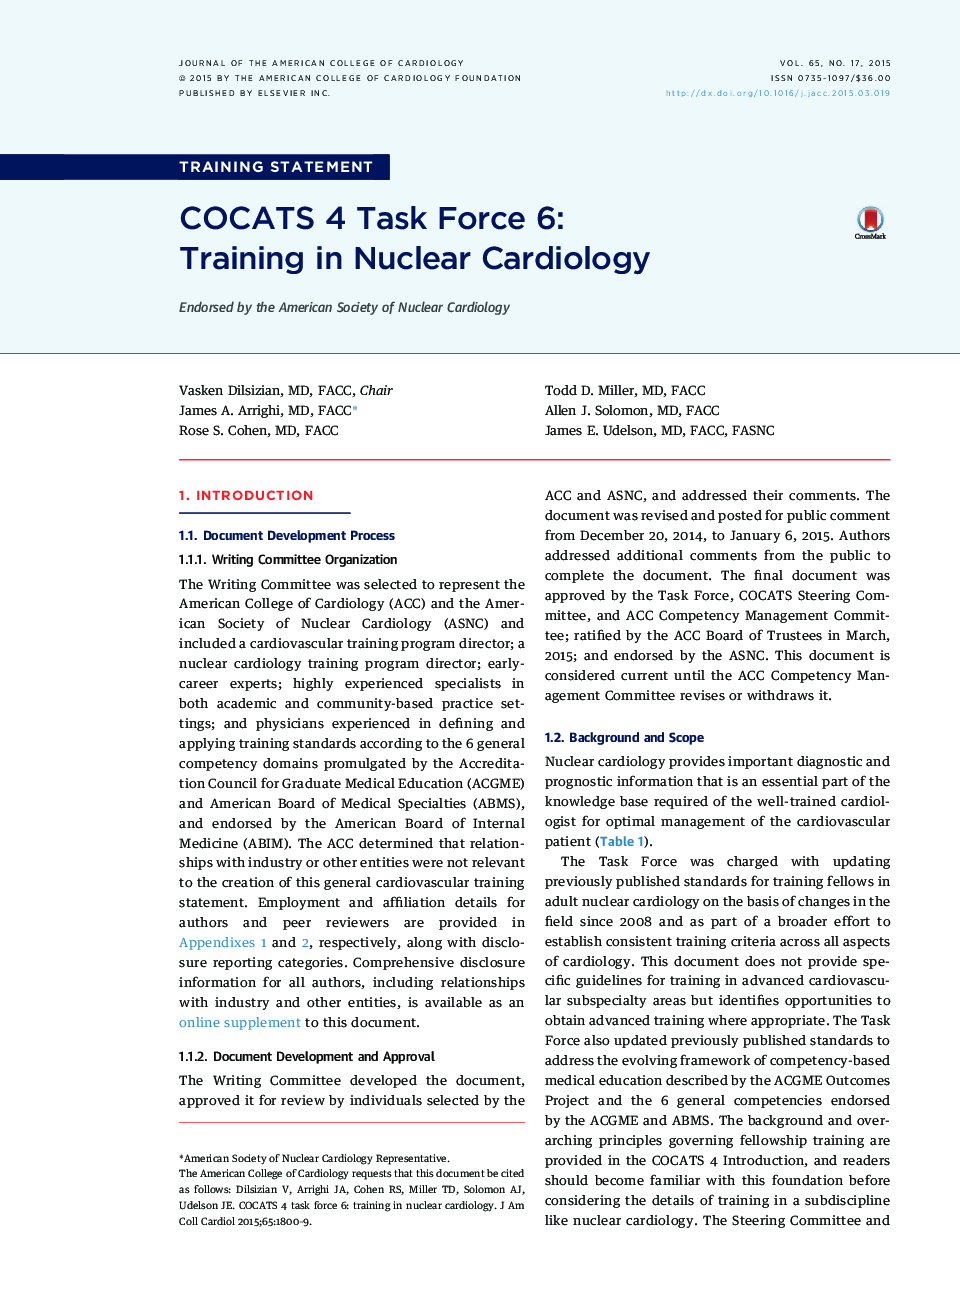 COCATS 4 Task Force 6: Training in Nuclear Cardiology